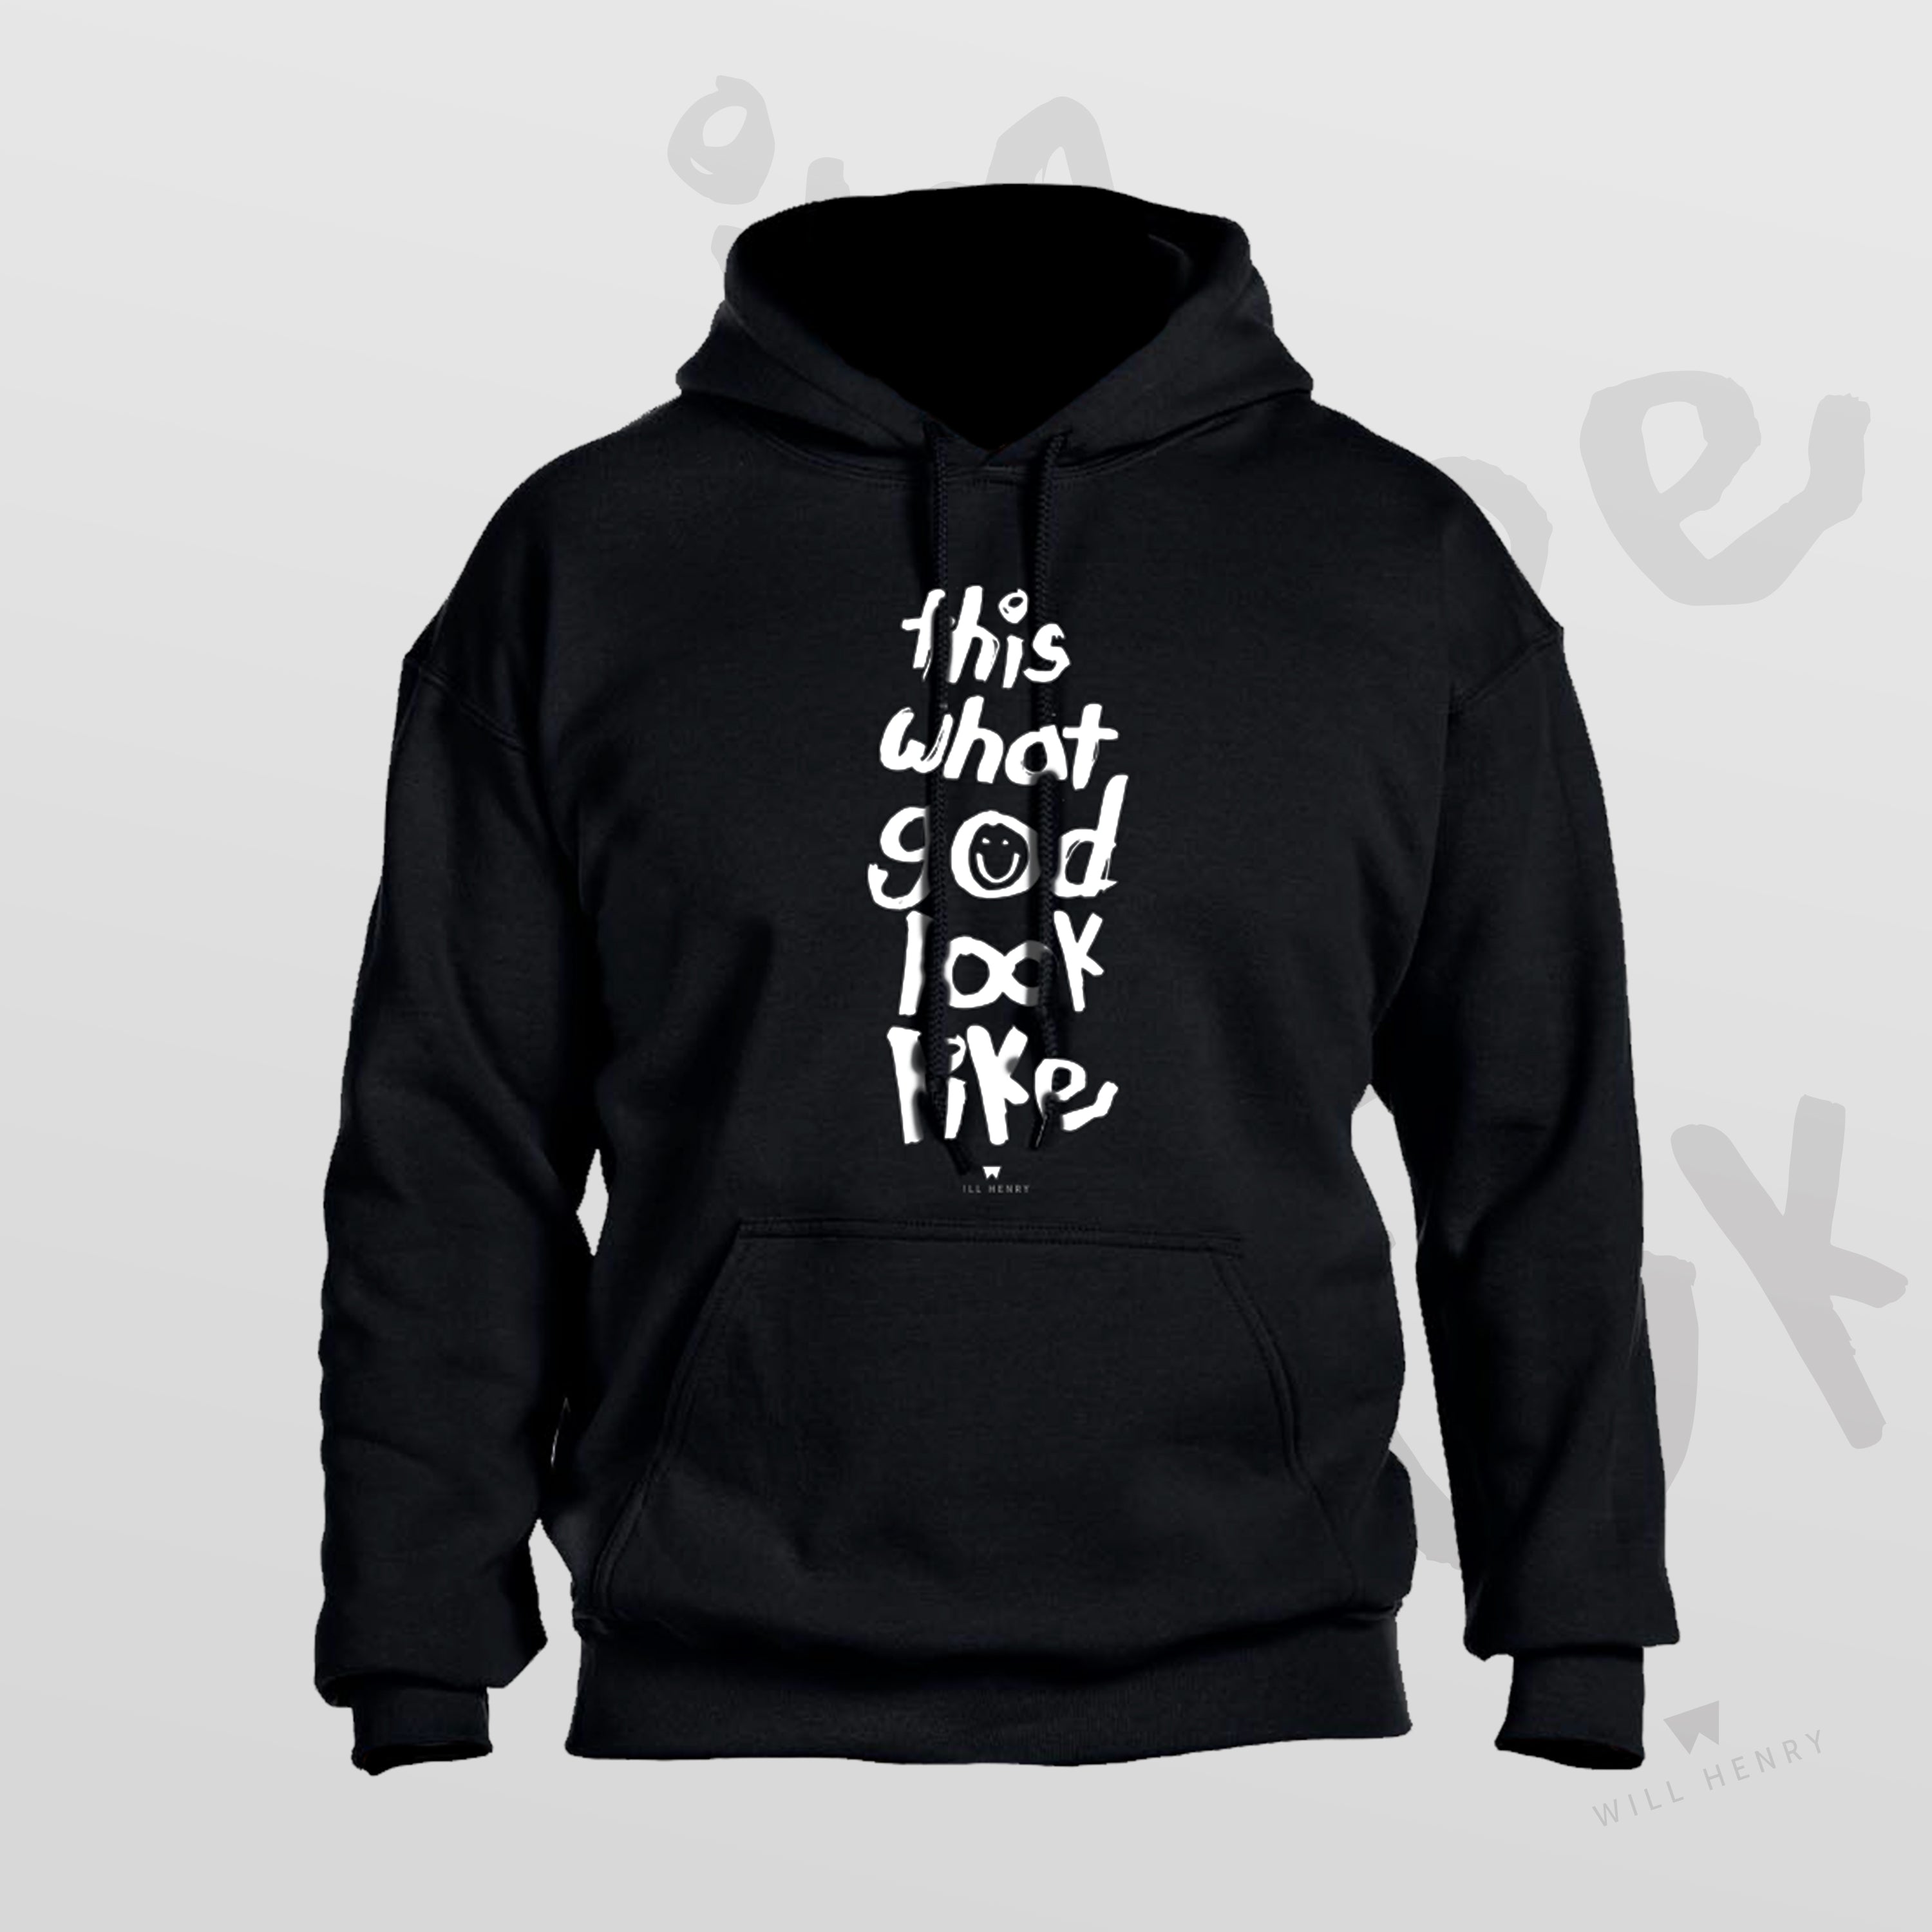 this what god look like - Pullover Hoodie